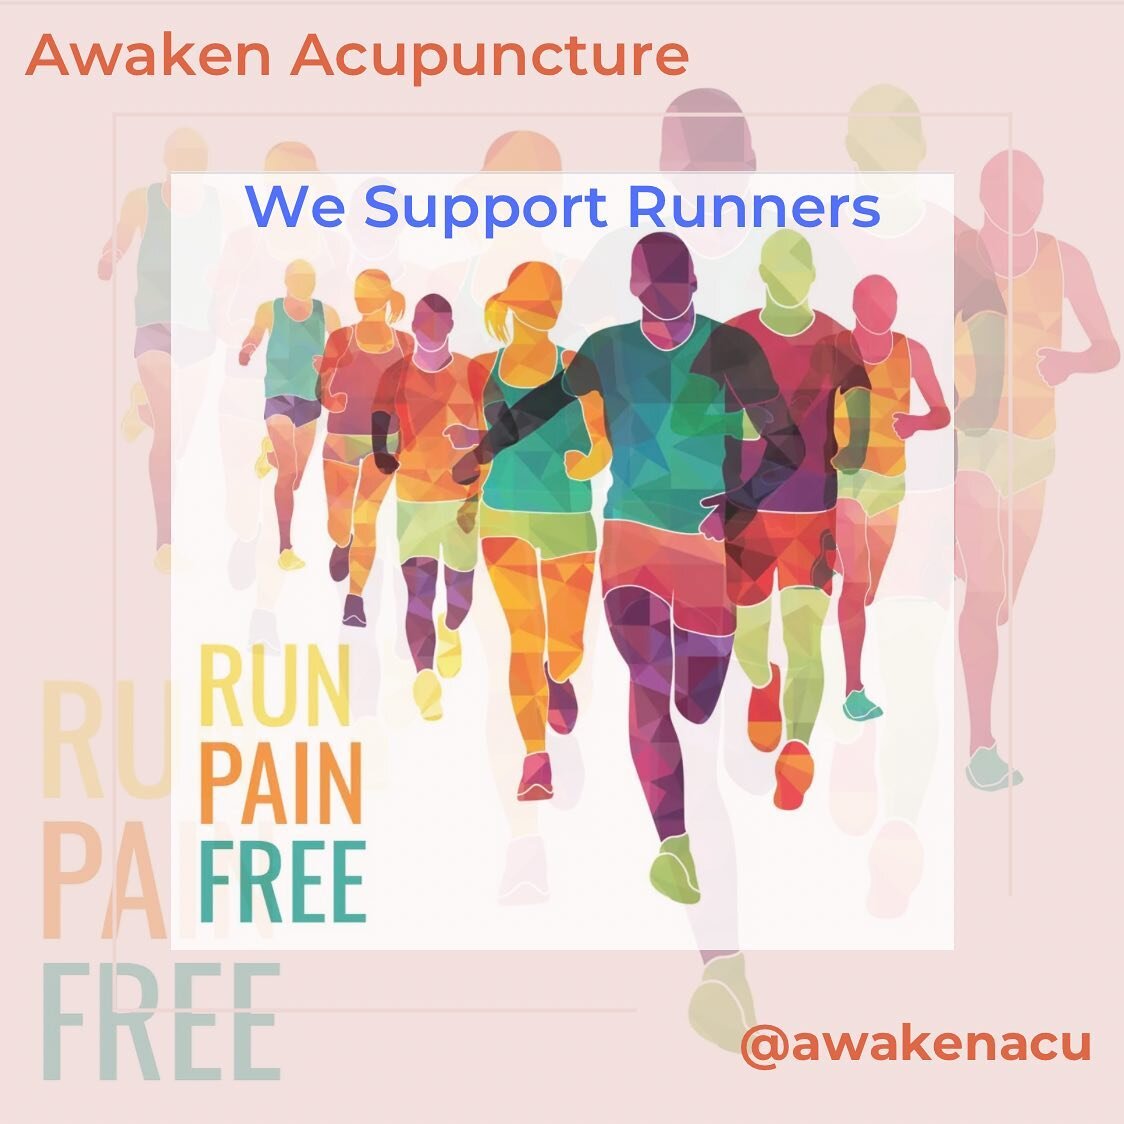 We Support Runners! WSR project In marathon season! Get acupuncture for your further achievement 🏃🏻&zwj;♀️🏃&zwj;♂️🏃🏻&zwj;♀️🏃&zwj;♂️

#runrunrun#withoutpain#marathonrunner#nymarathon2023#manhattanacupuncture#midtownclinic#saturdays#anklepain#kne